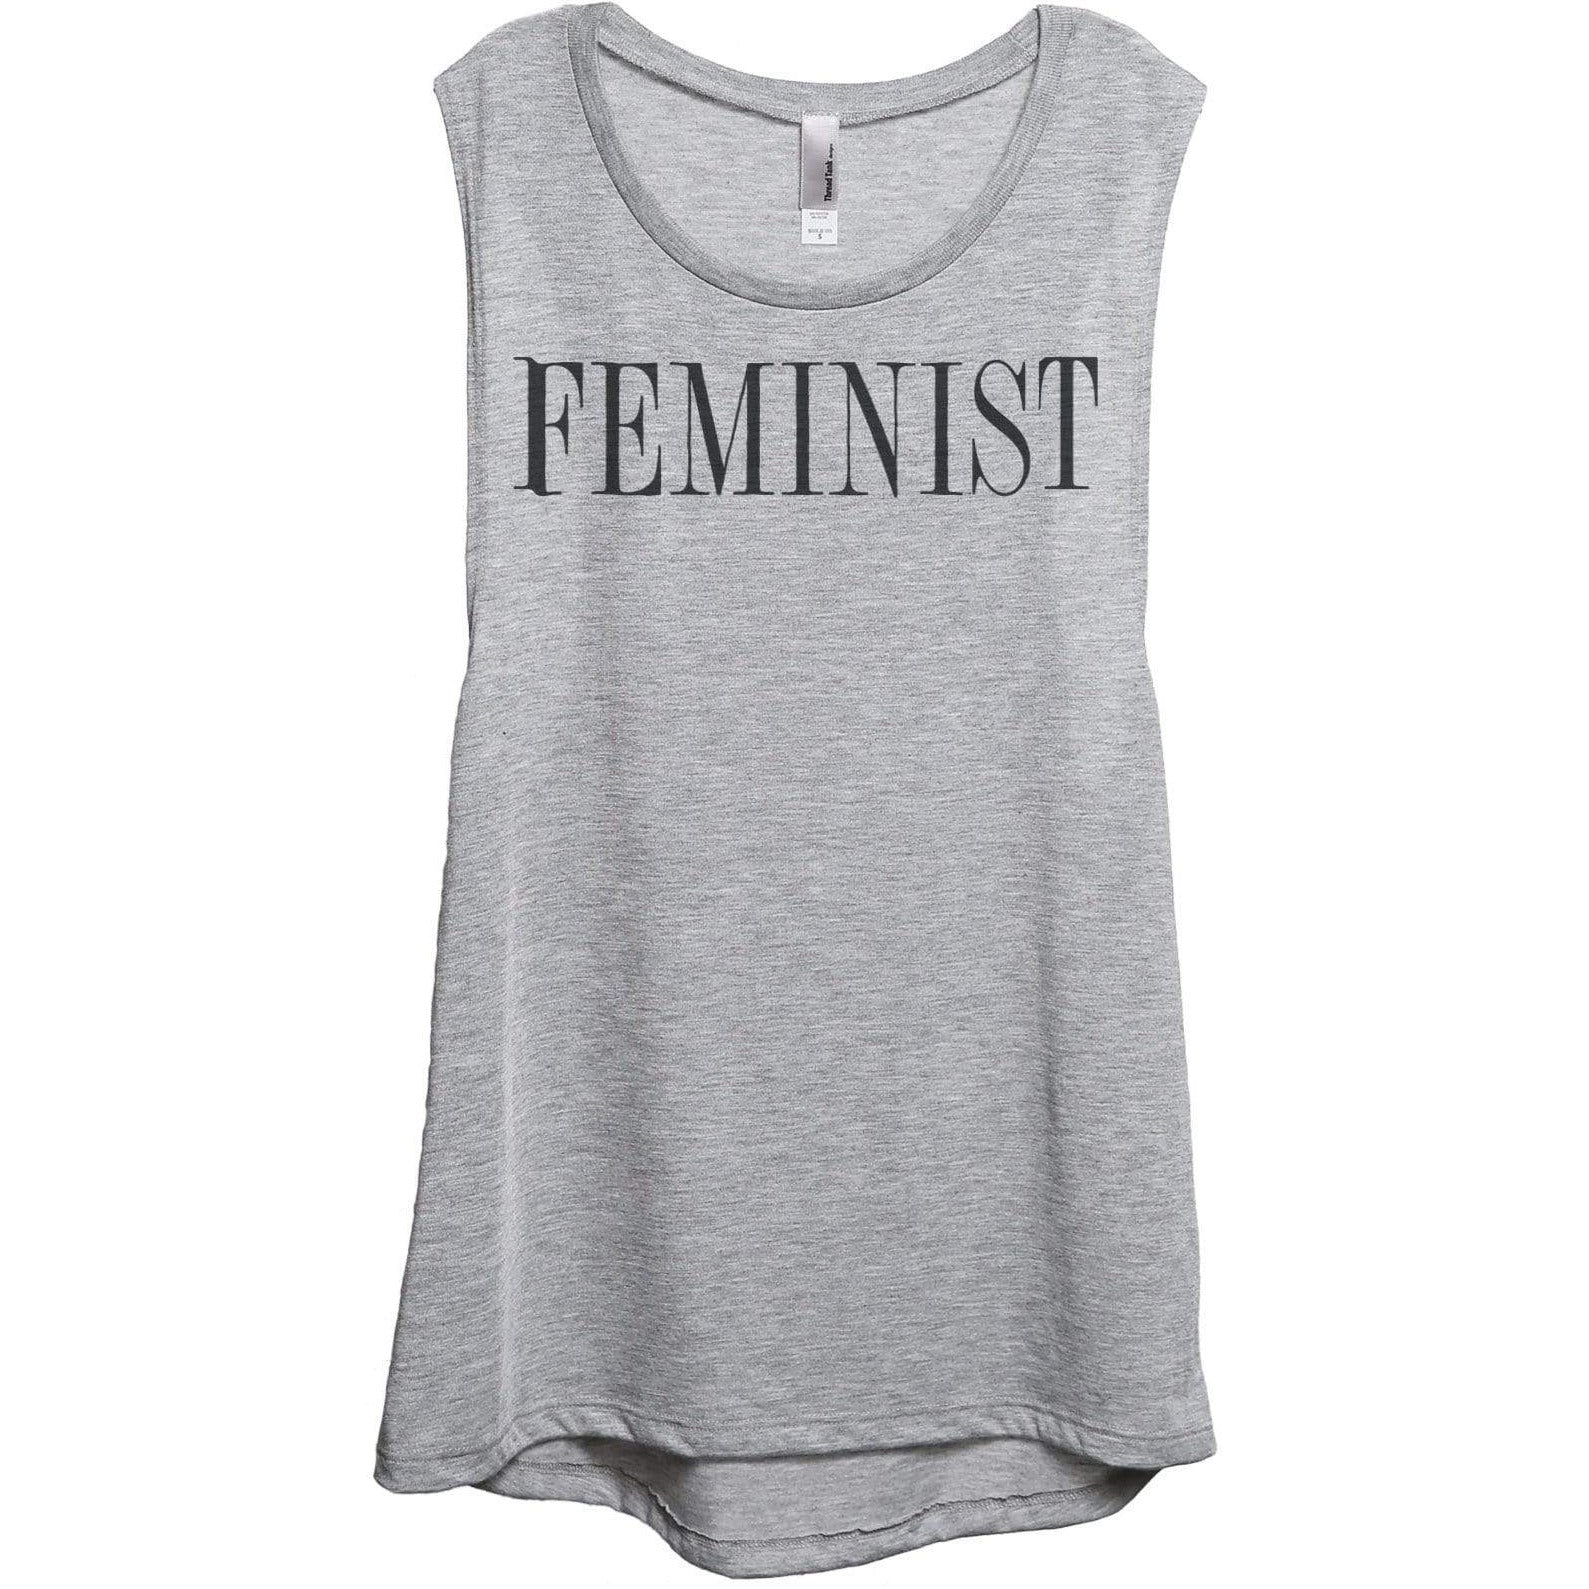 Feminist - Thread Tank | Stories You Can Wear | T-Shirts, Tank Tops and Sweatshirts